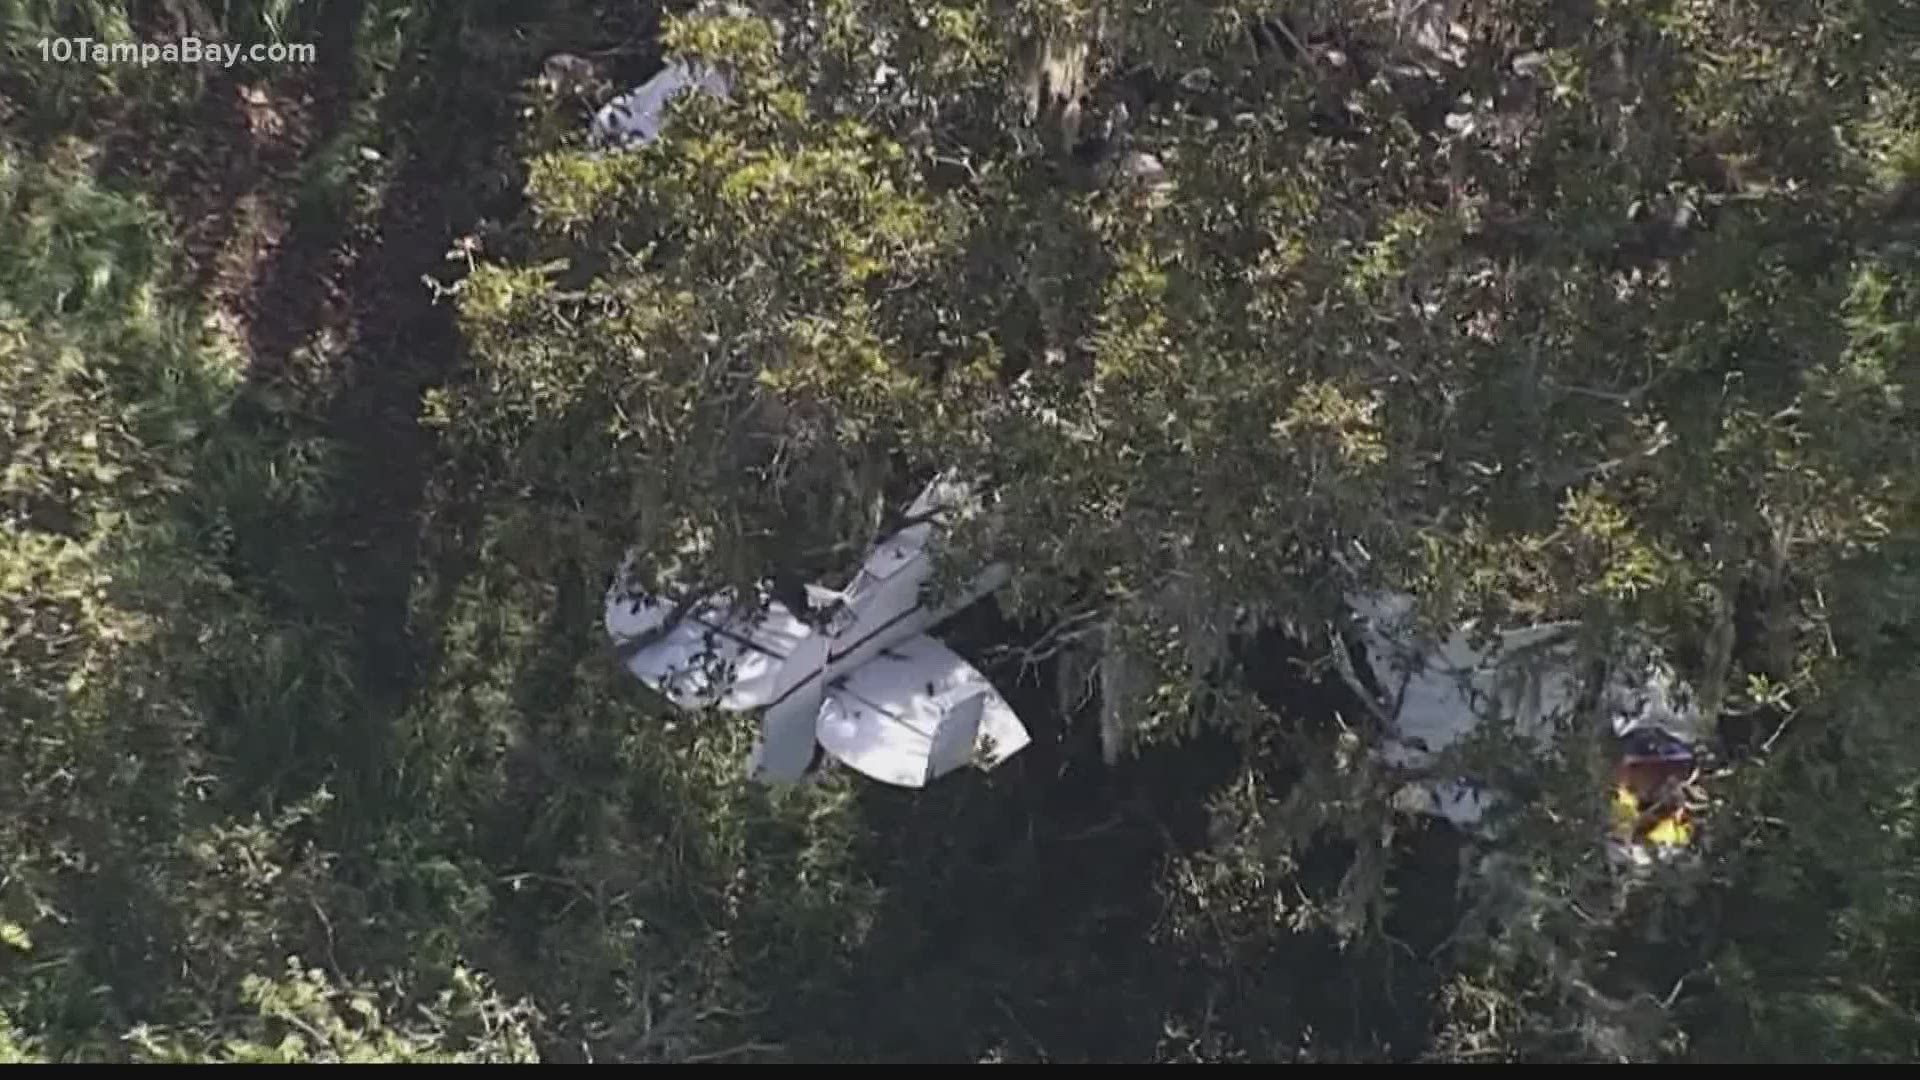 Investigators said the pilot was the only person on the plane when it crashed.